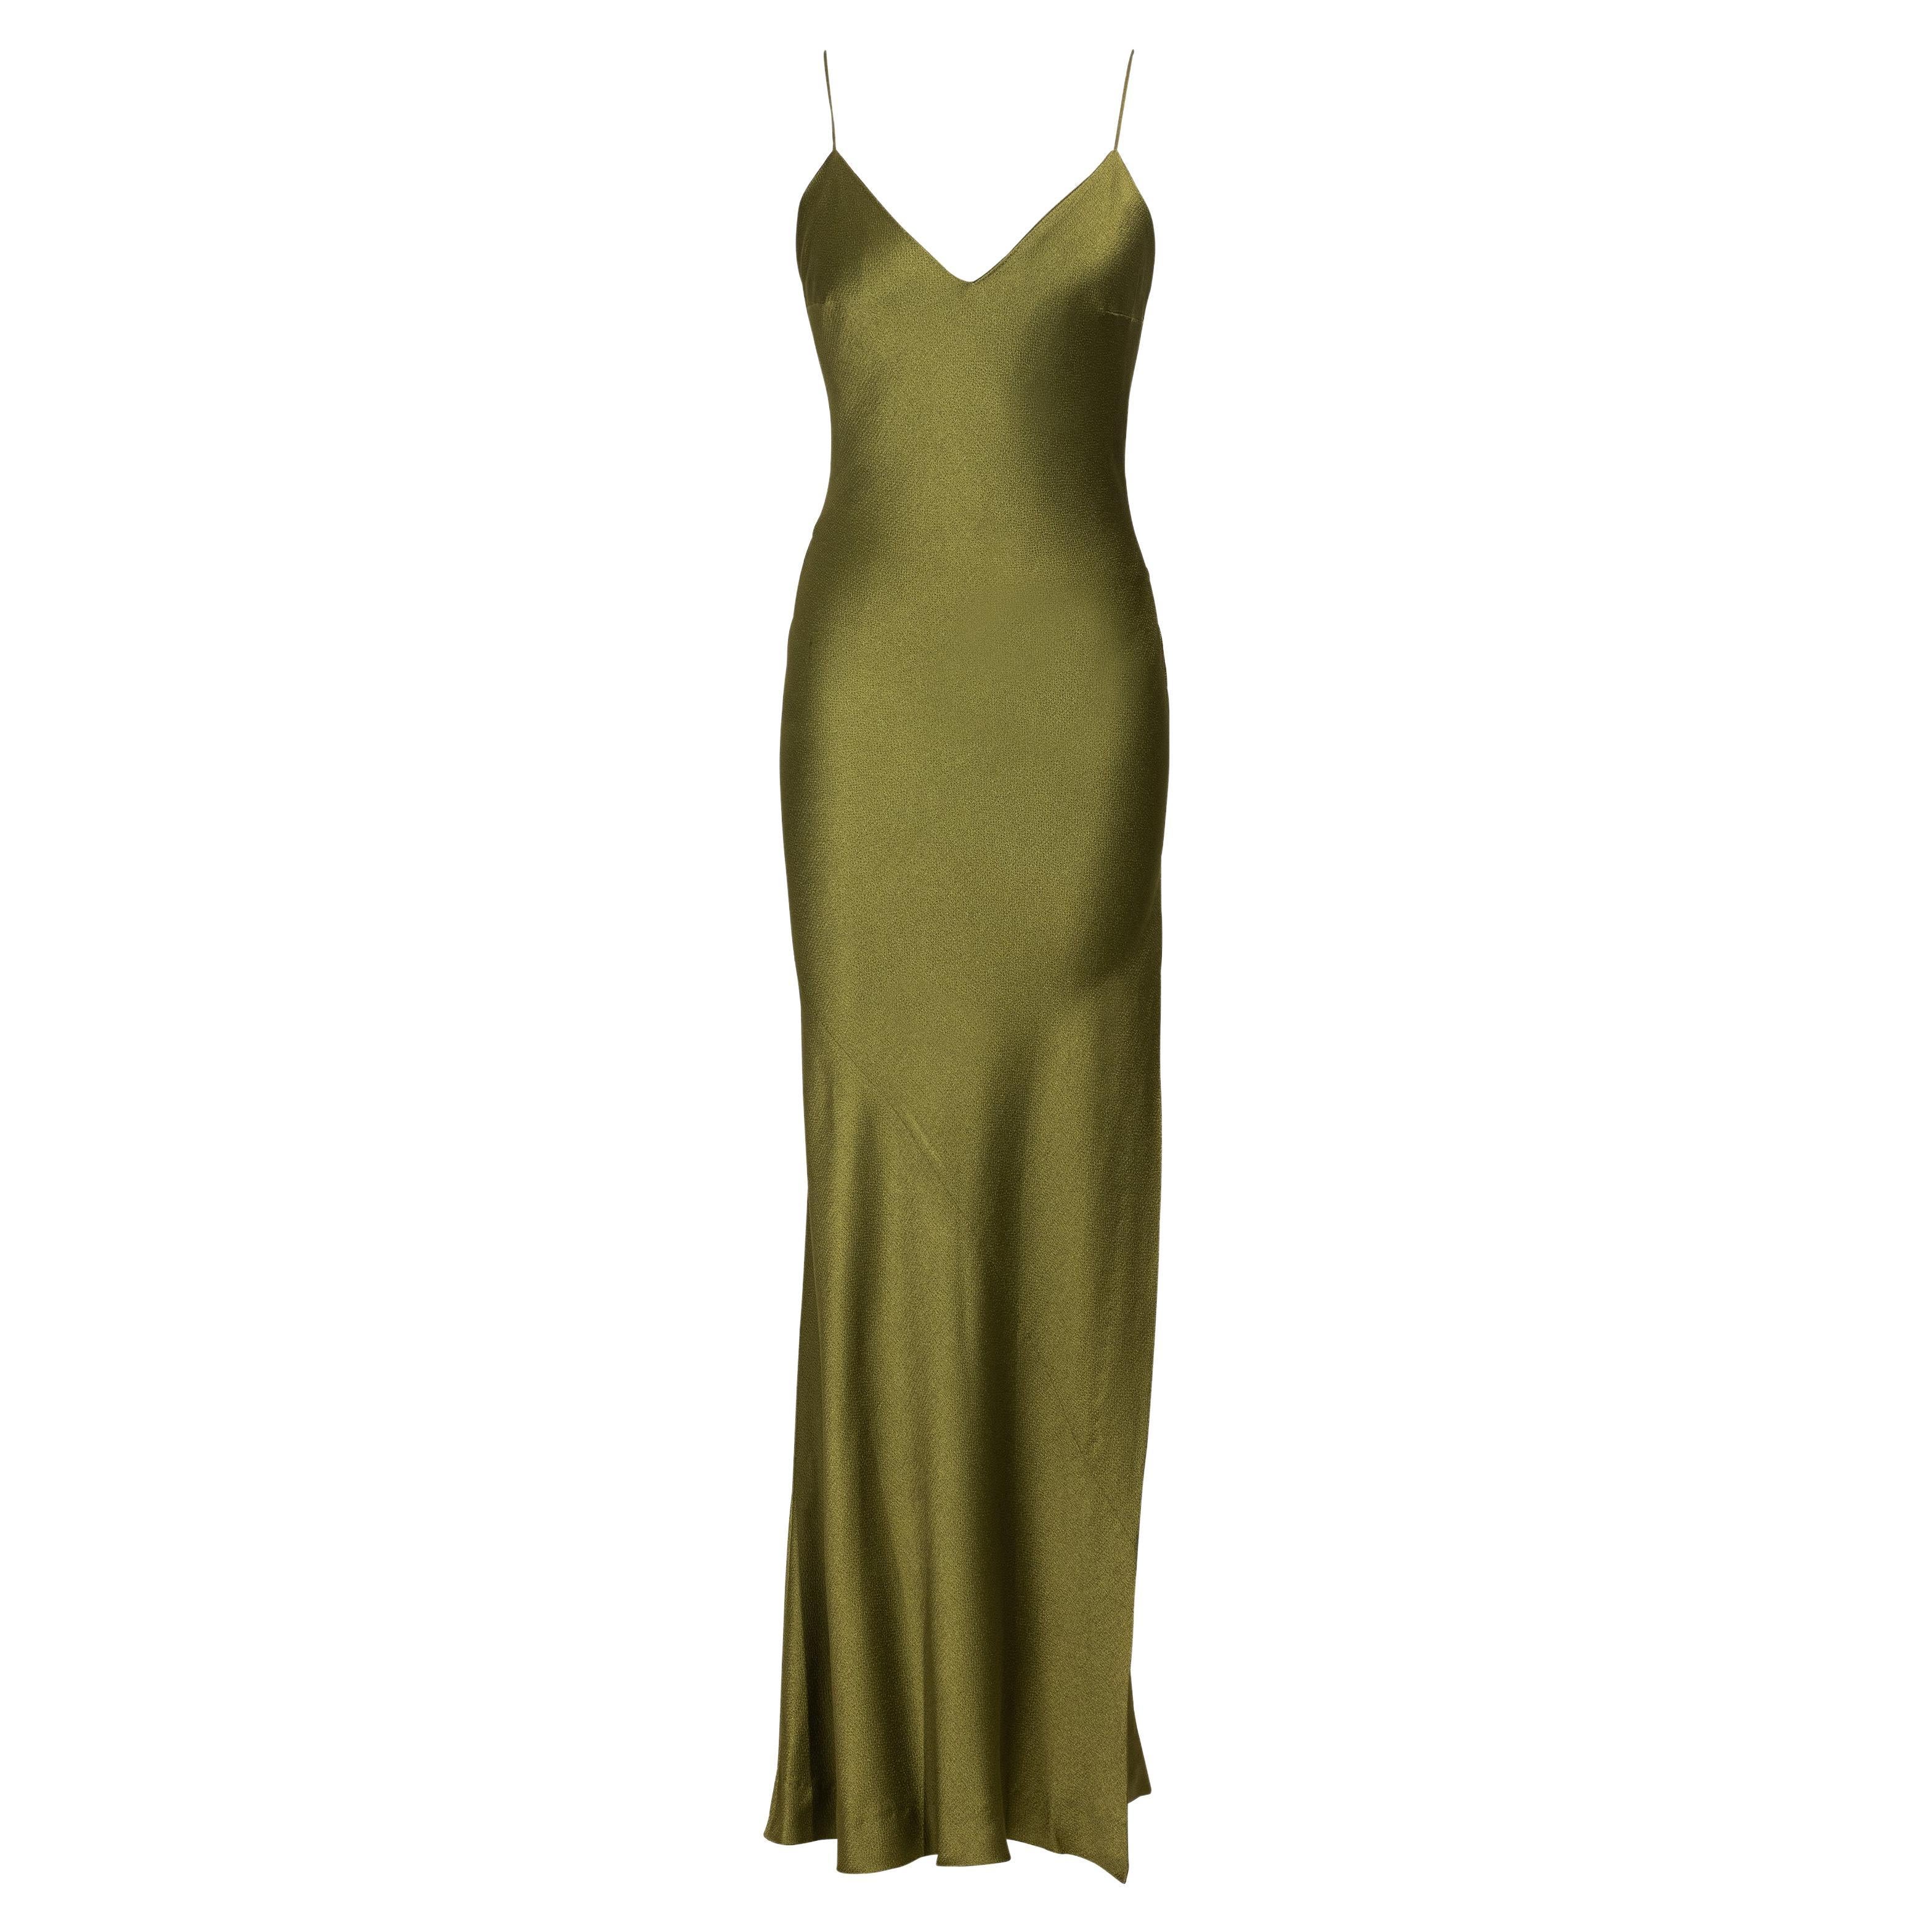 S/S 1999 Christian Dior by John Galliano Olive Green Bias Cut Slip Gown For Sale